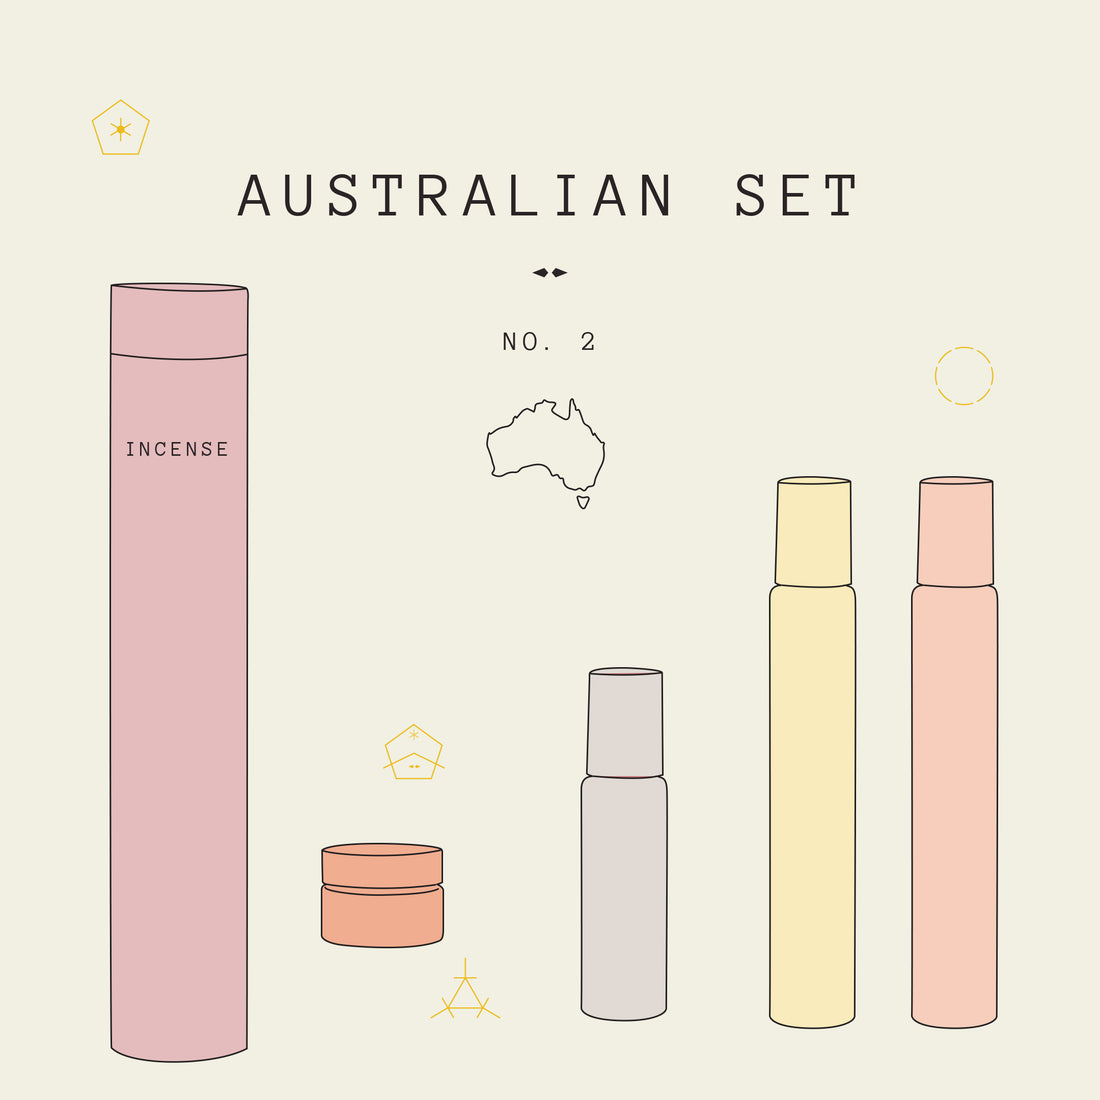 Australian 2 Gift Set includes five of our favourite Australian scented perfume and perfumed products.  PRODUCTS INCLUDED:  ・Serene Body Health Red Desert, 10ml ・Melis Navitus Spiritus Natural Perfume Roll On, 9ml ・Addition Studio Australian Native Incense  Eucalytpus & Acacia Cylinder 25 pieces ・Wyalba Wildflower Natural Perfume Spray, 10ml ・Wyalba Firetree Natural Perfume Balm, 15g